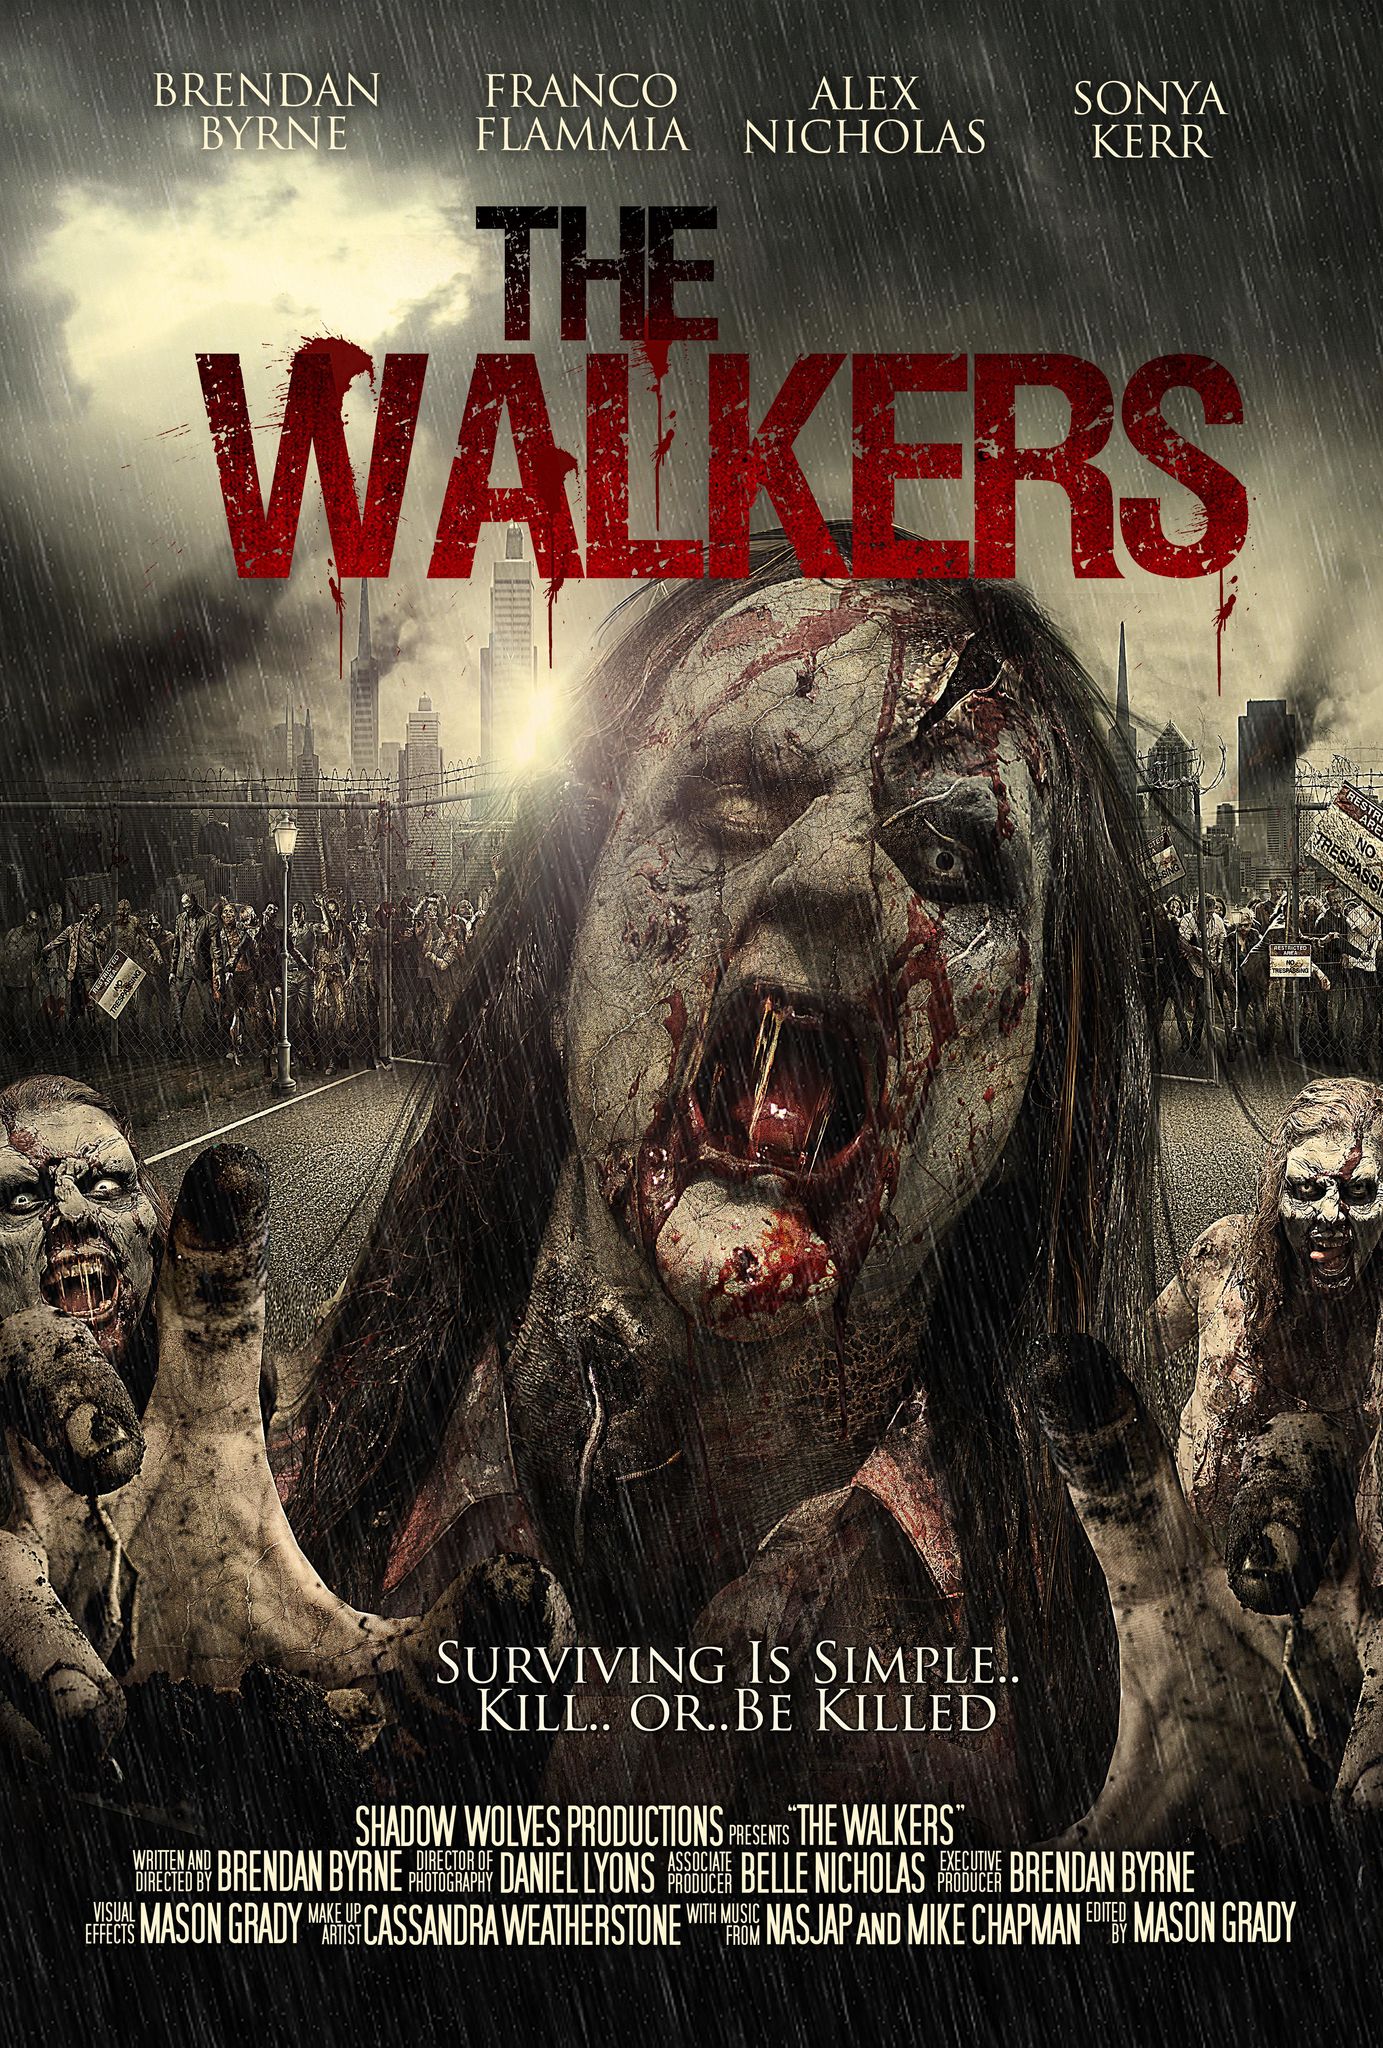 THE WALKERS